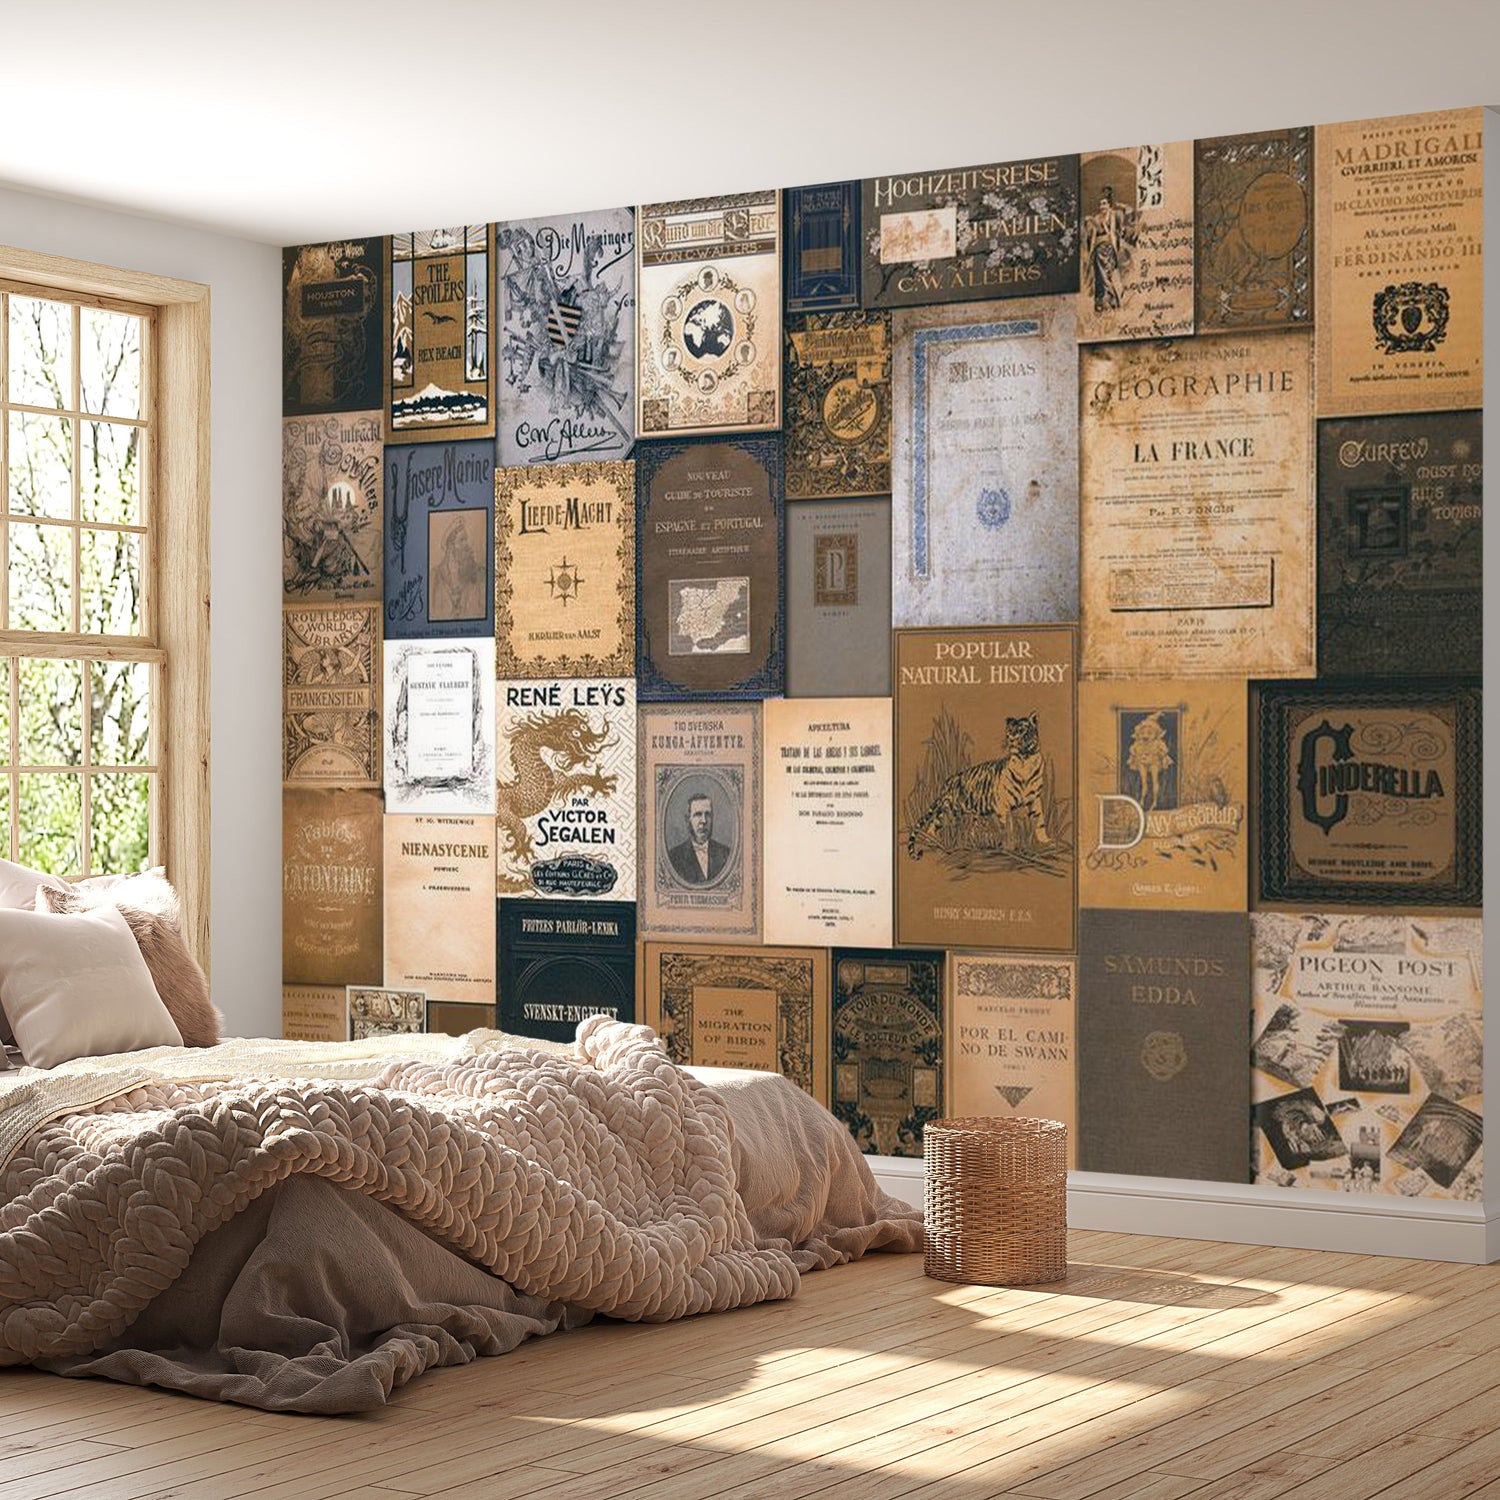 Peel & Stick Wall Mural - Old Book Covers - Removable Wall Decals